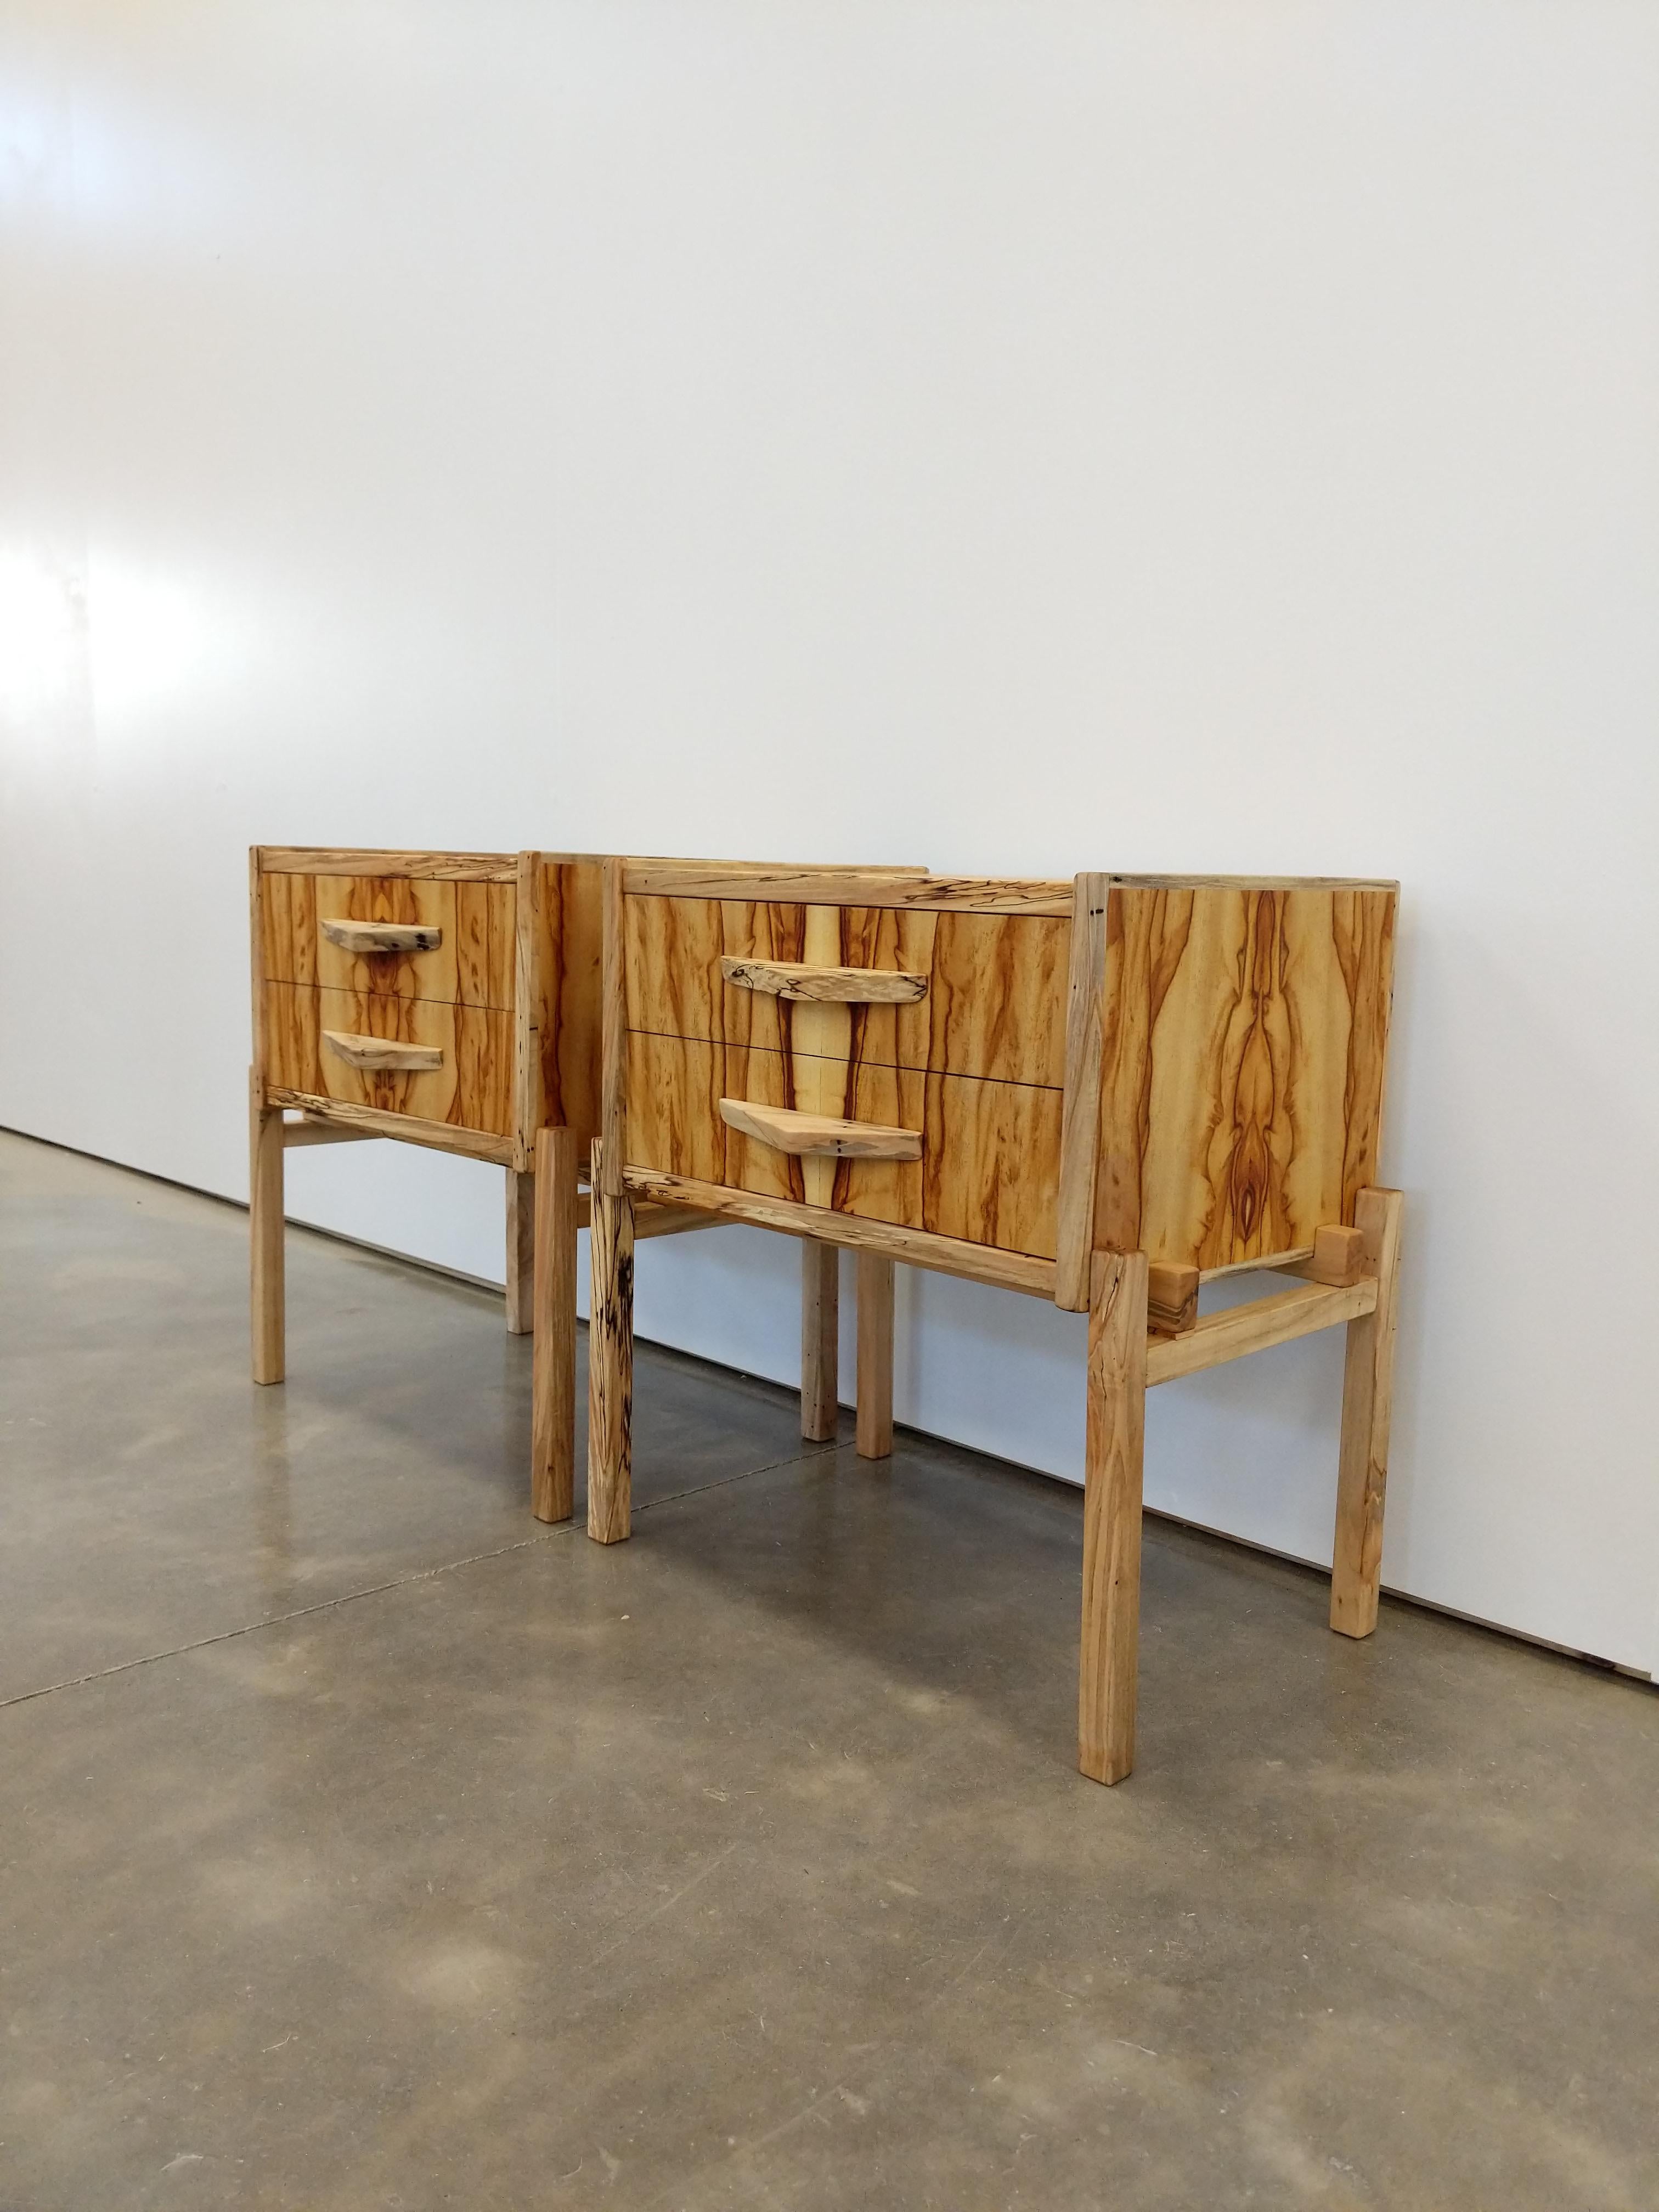 Pair of contemporary nightstands / side tables / low chests of drawers in chechen and spalted maple.

Handmade at our workshop in NY in a Modernist style using the highest quality materials available.

The bold chechen wood grain is complemented by